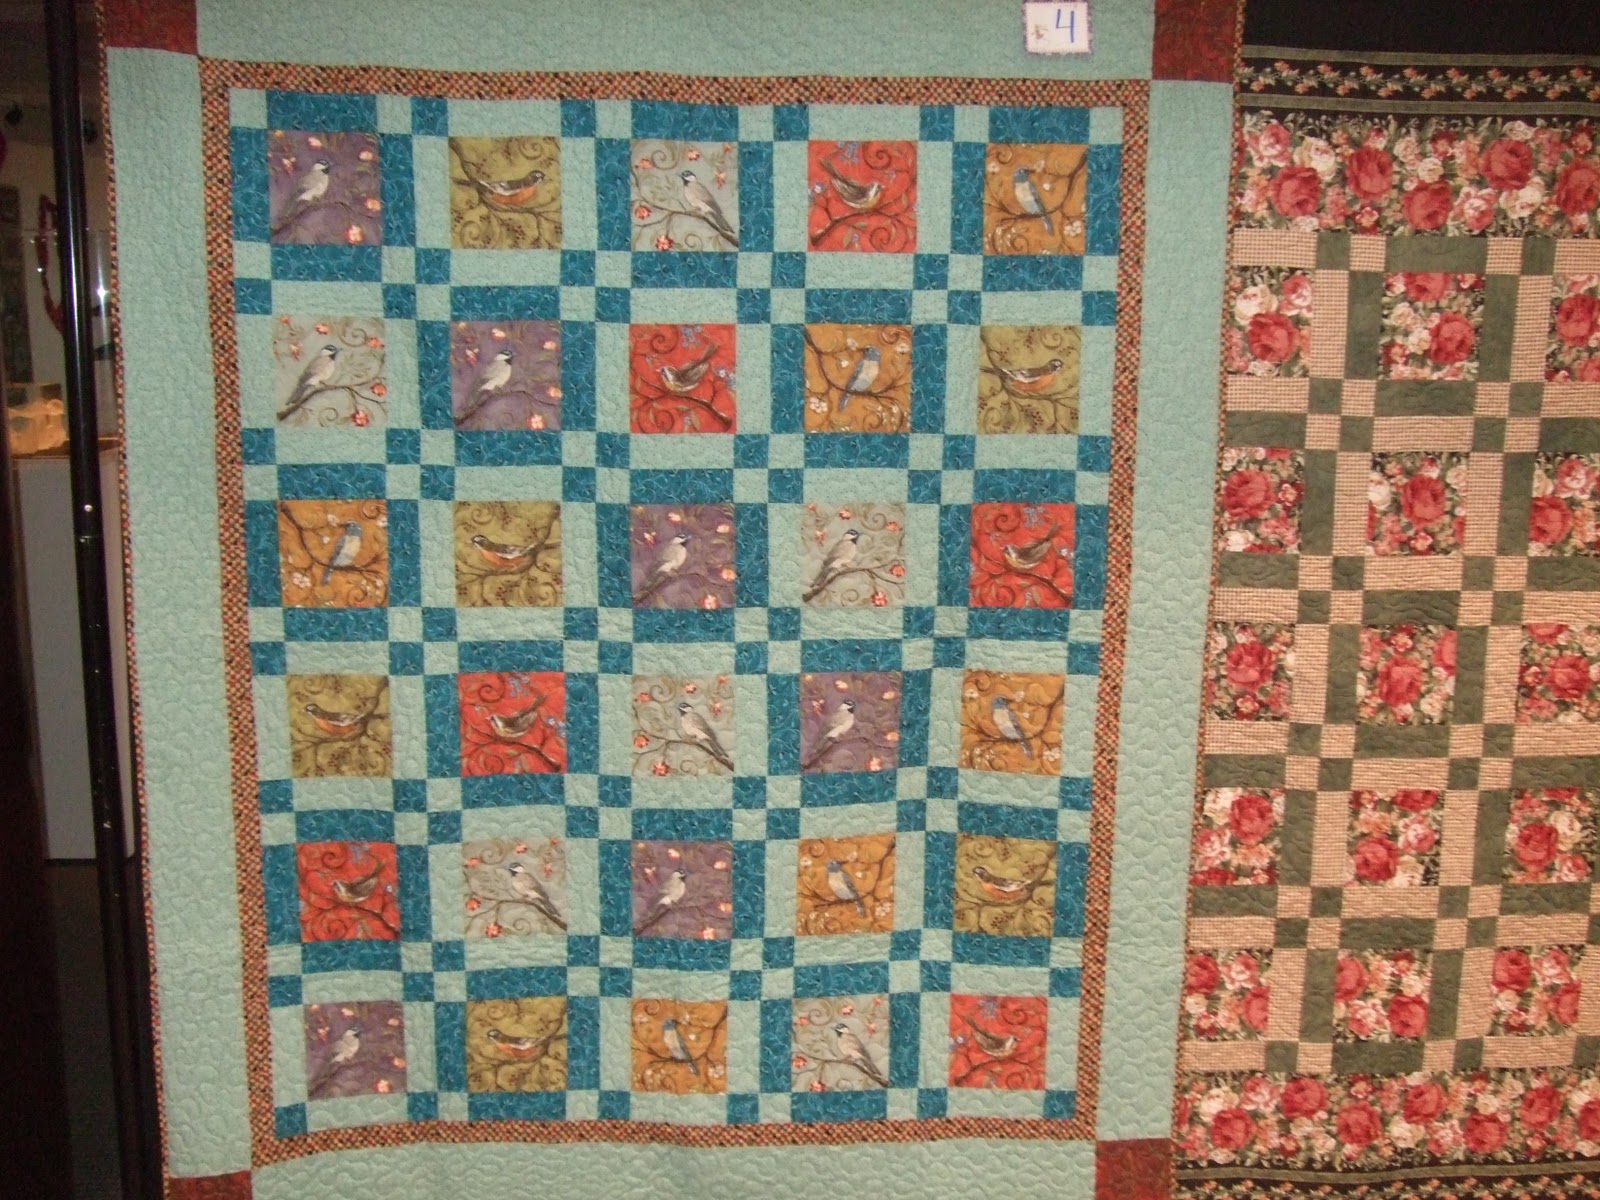 mystery quilt